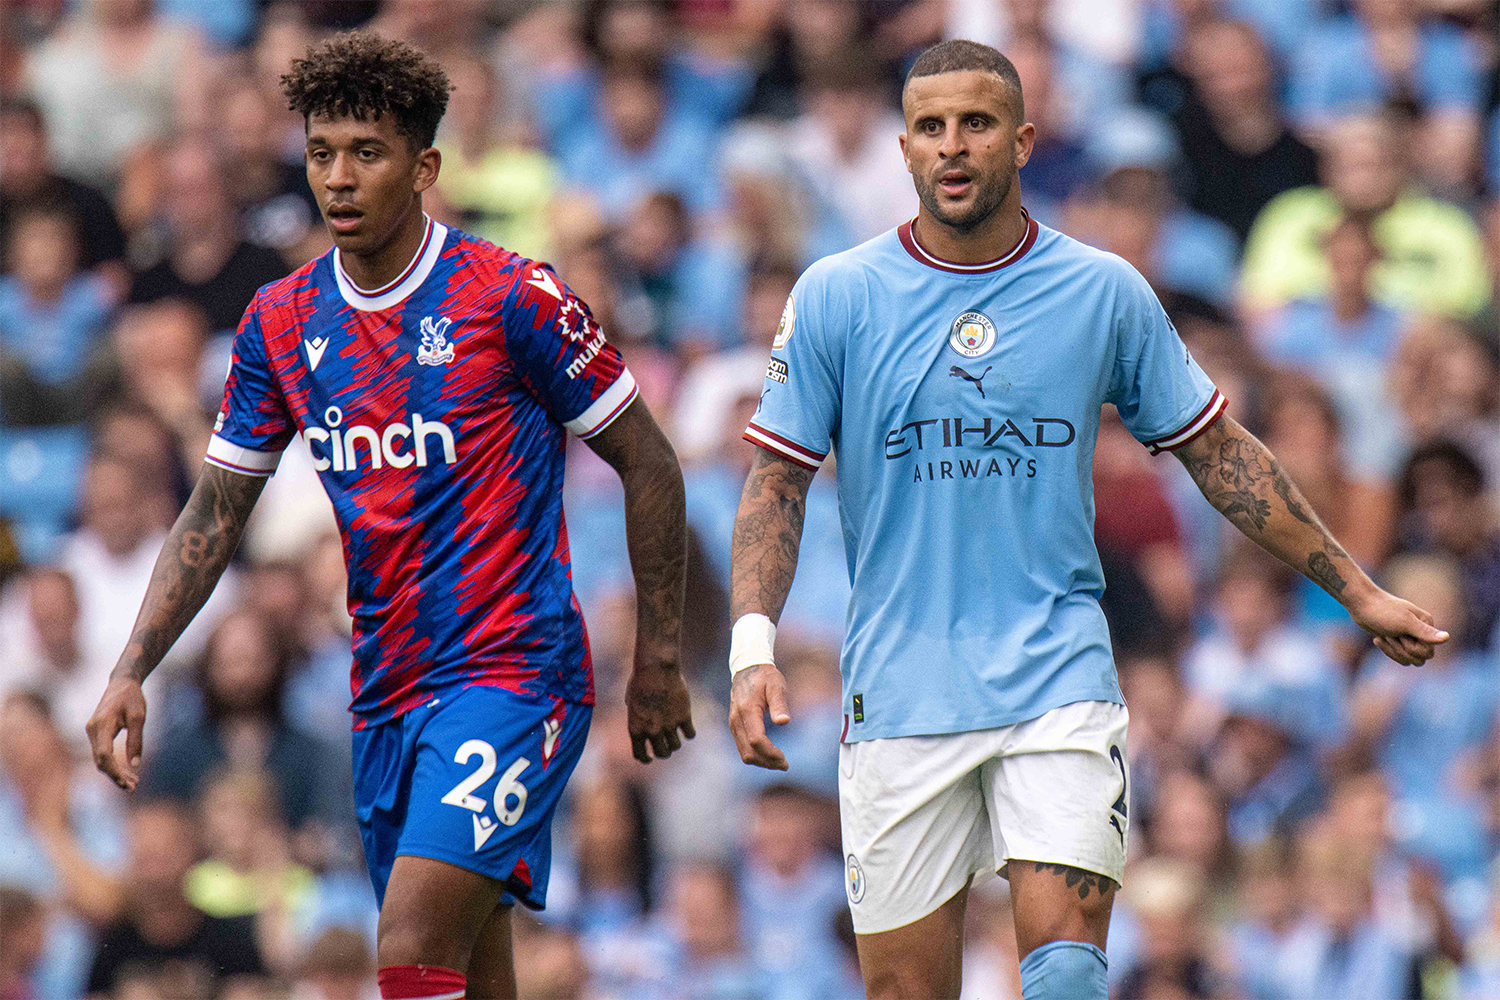 Chris Richards of Crystal Palace and Kyle Walker of Manchester City during the Premier League match between Manchester City and Crystal Palace at Etihad Stadium on August 27, 2022 in Manchester, United Kingdom.